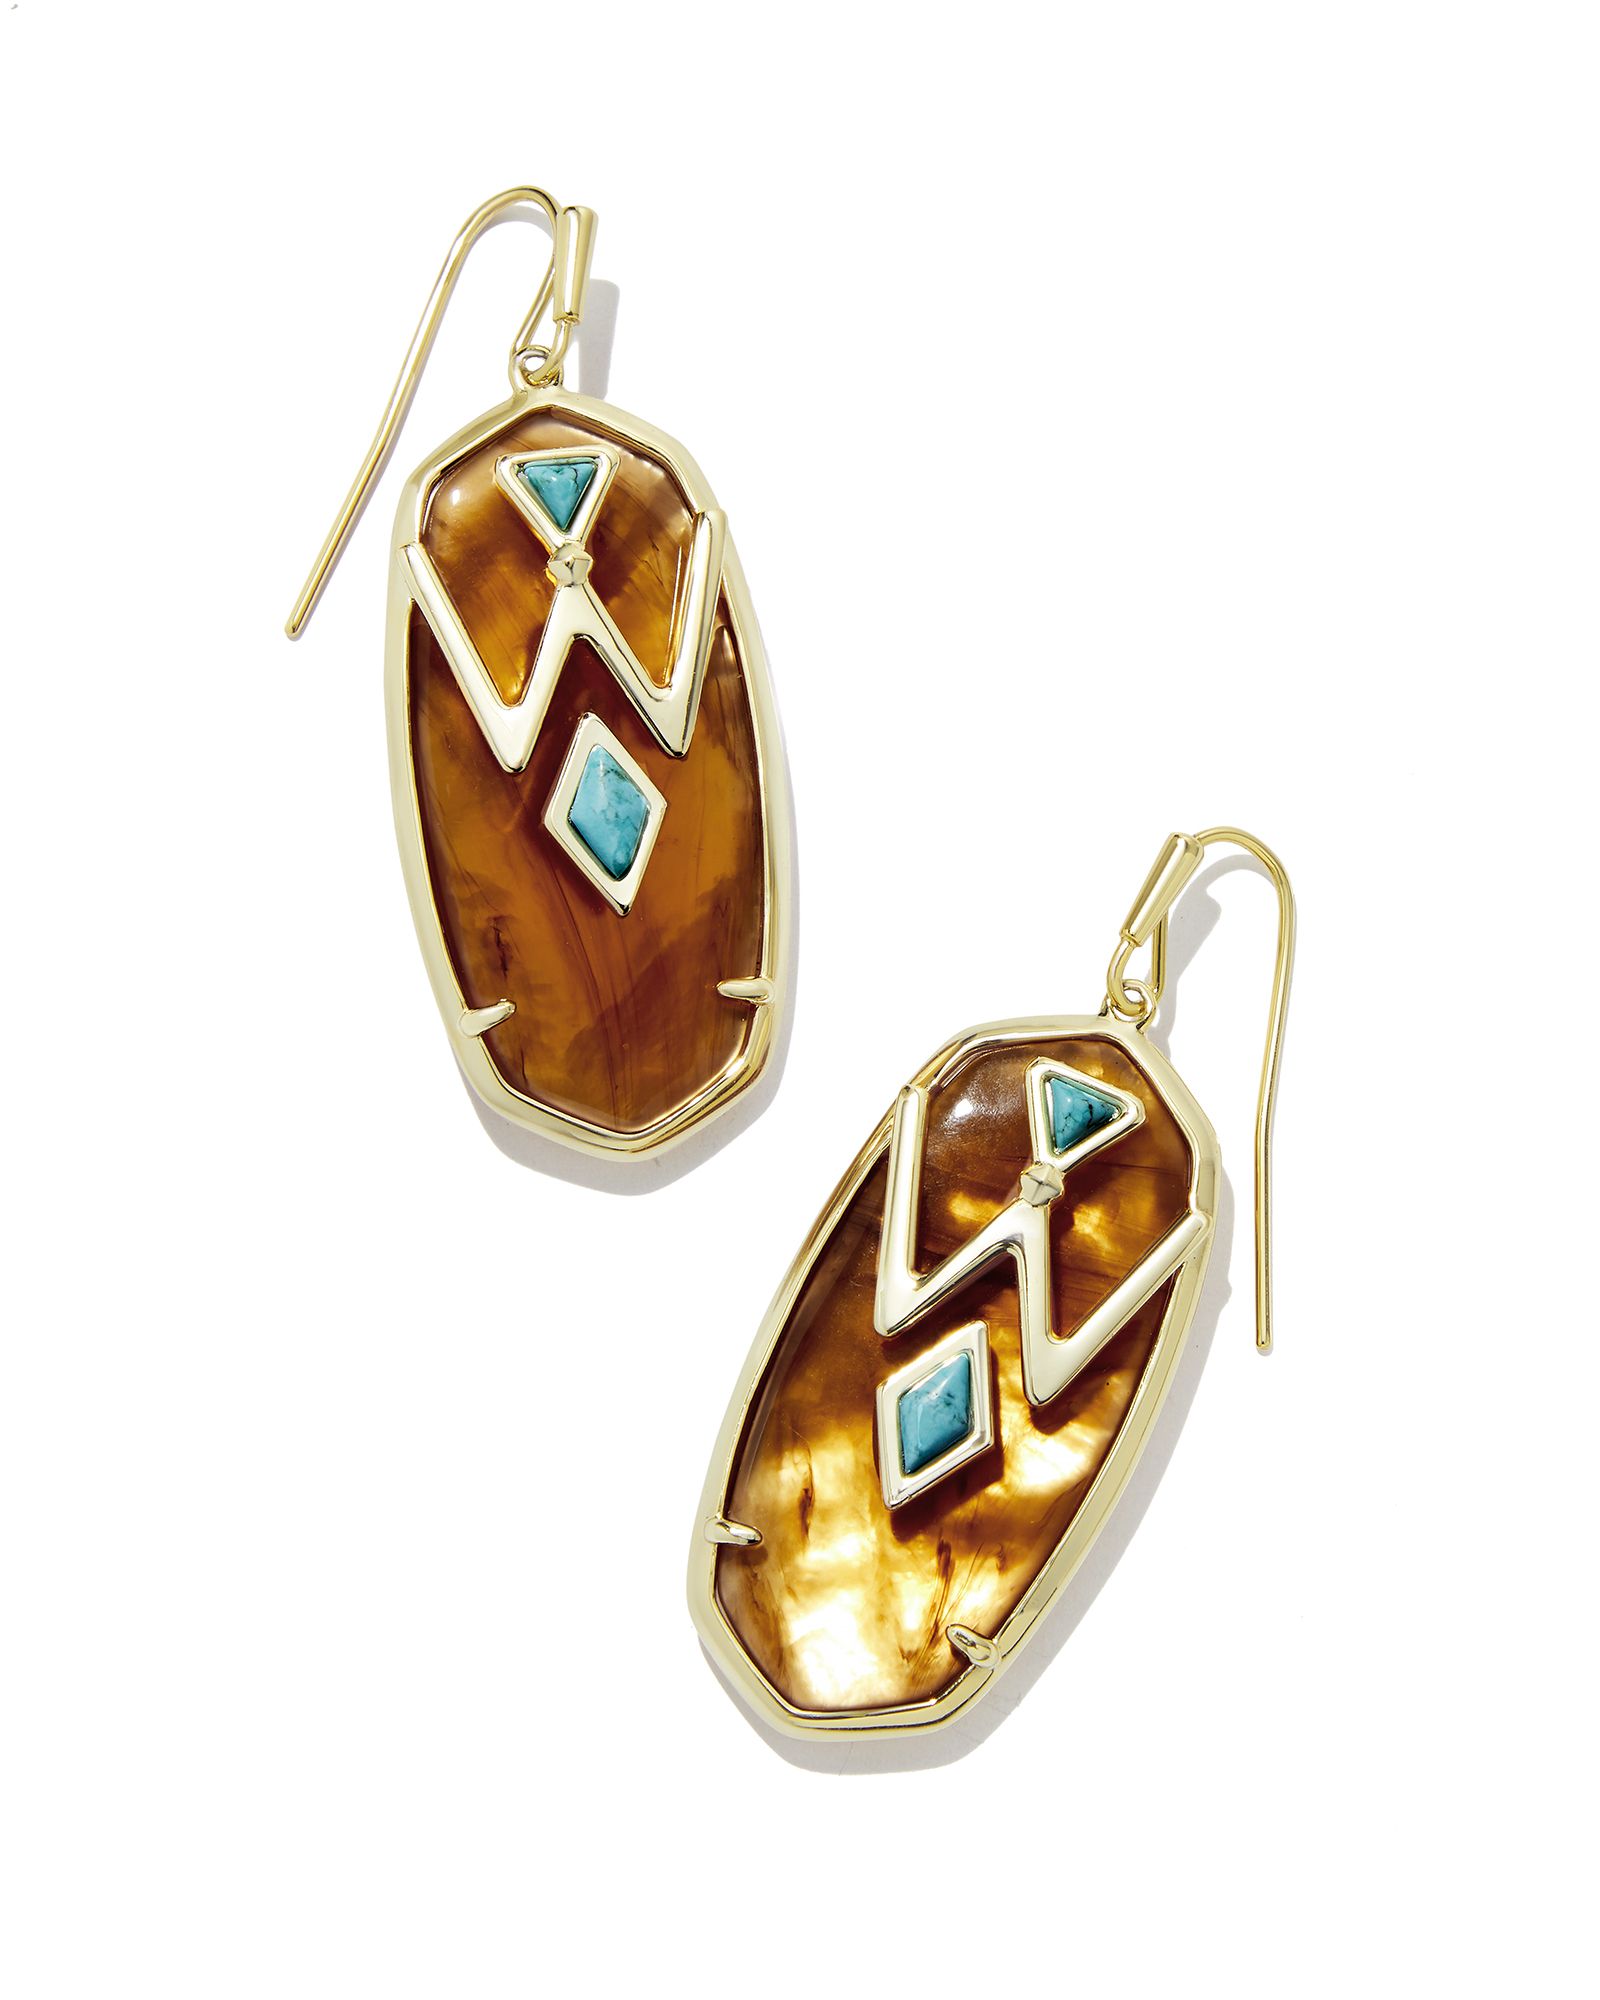 Wrangler® x Yellow Rose by Kendra Scott Elle Gold Drop Earrings in Amber Illusion with Variegate... | Kendra Scott